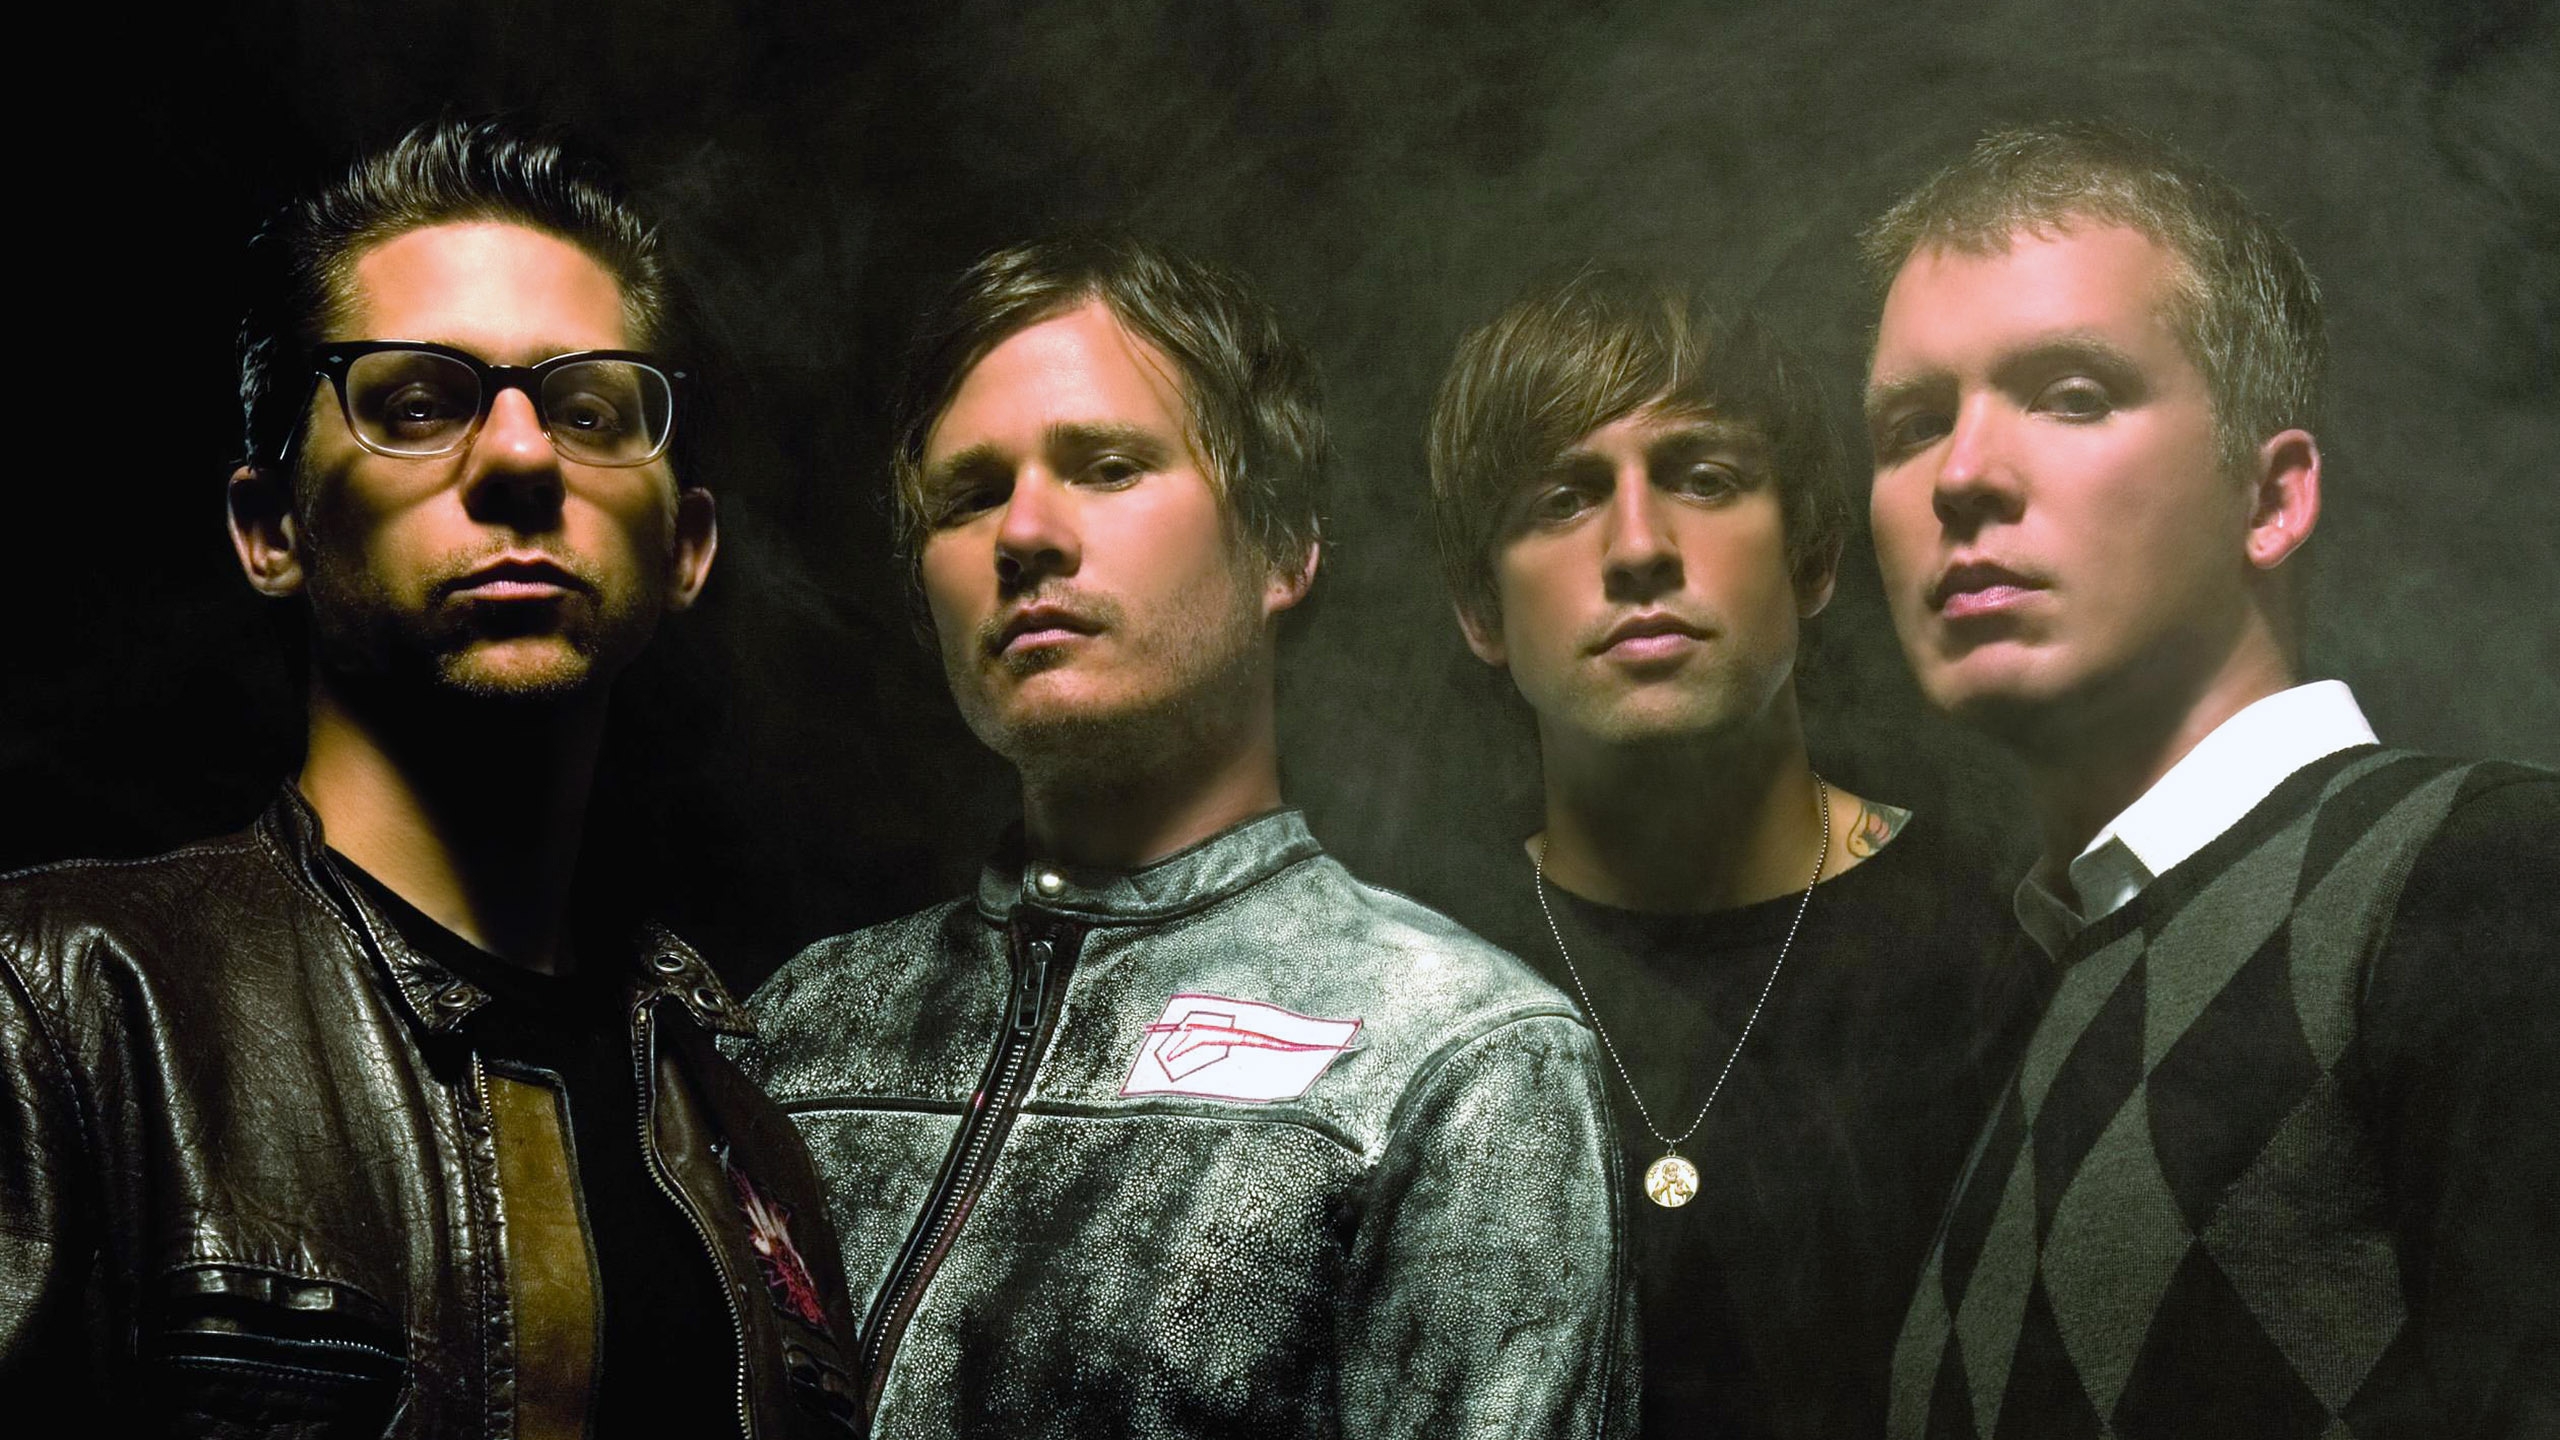 Angels and Airwaves for 2560x1440 HDTV resolution